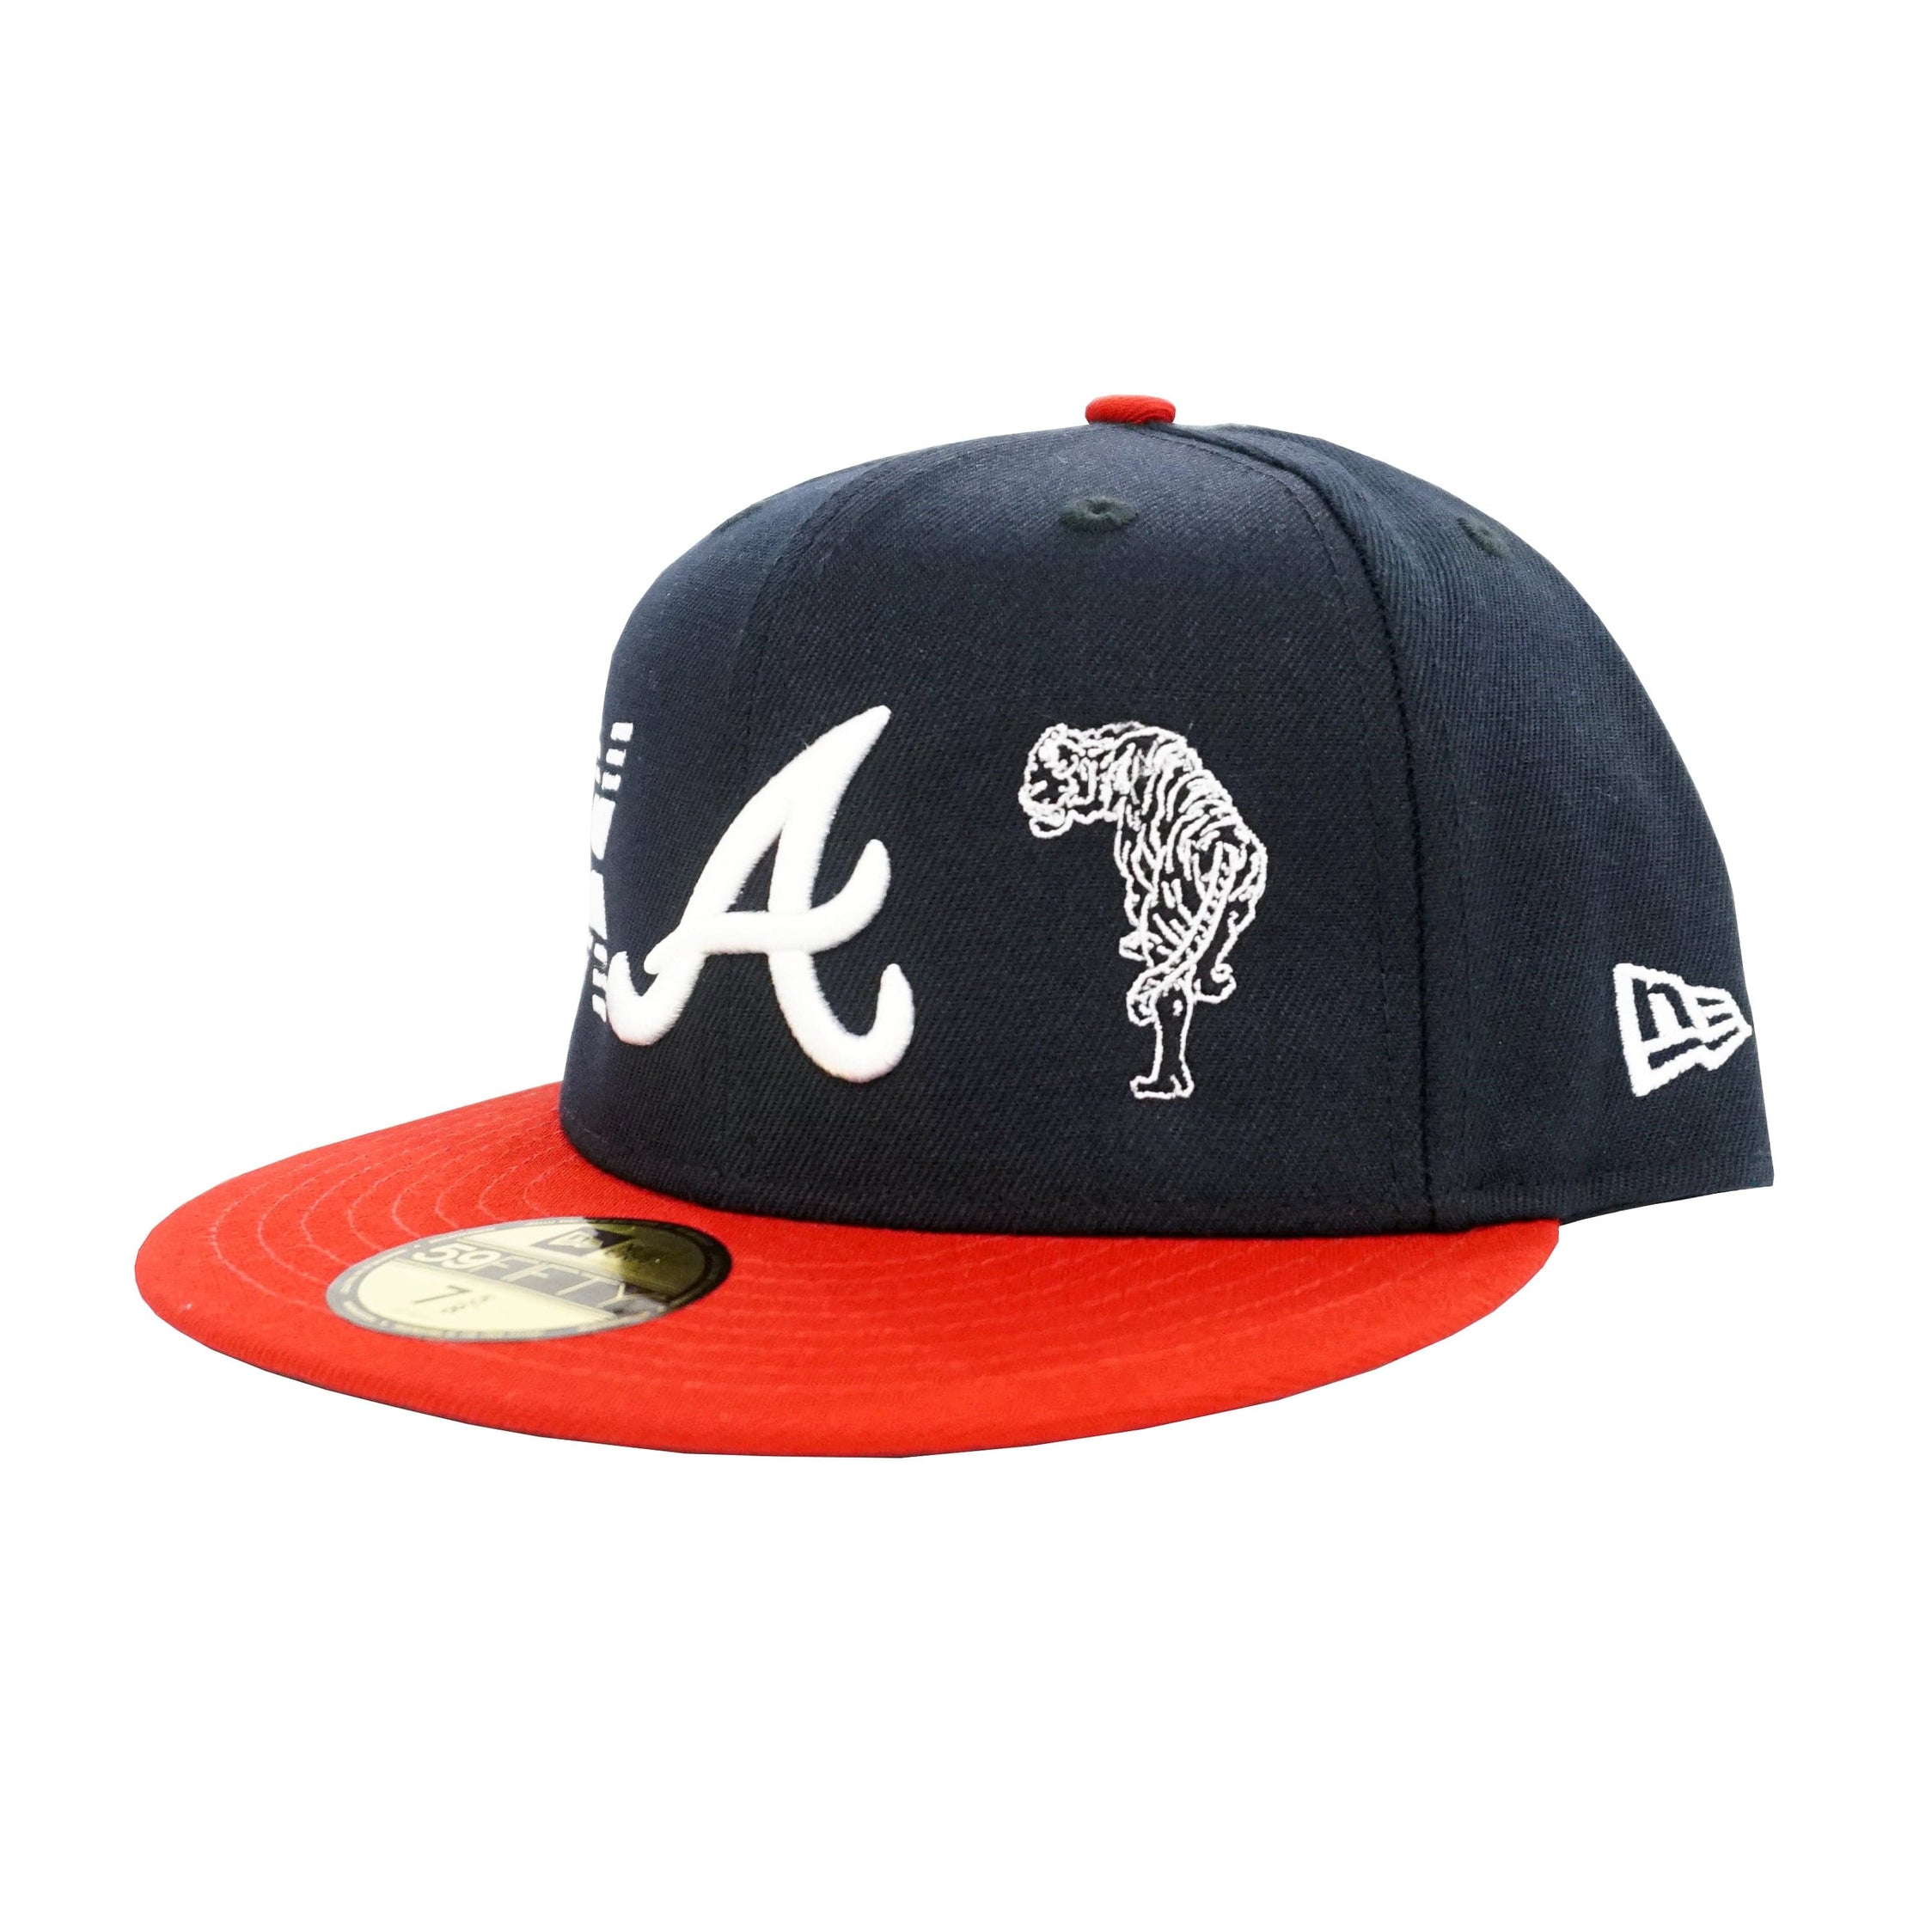 State Of Flux X New Era Atlanta Braves 59Fifty Fitted Hat in navy and red